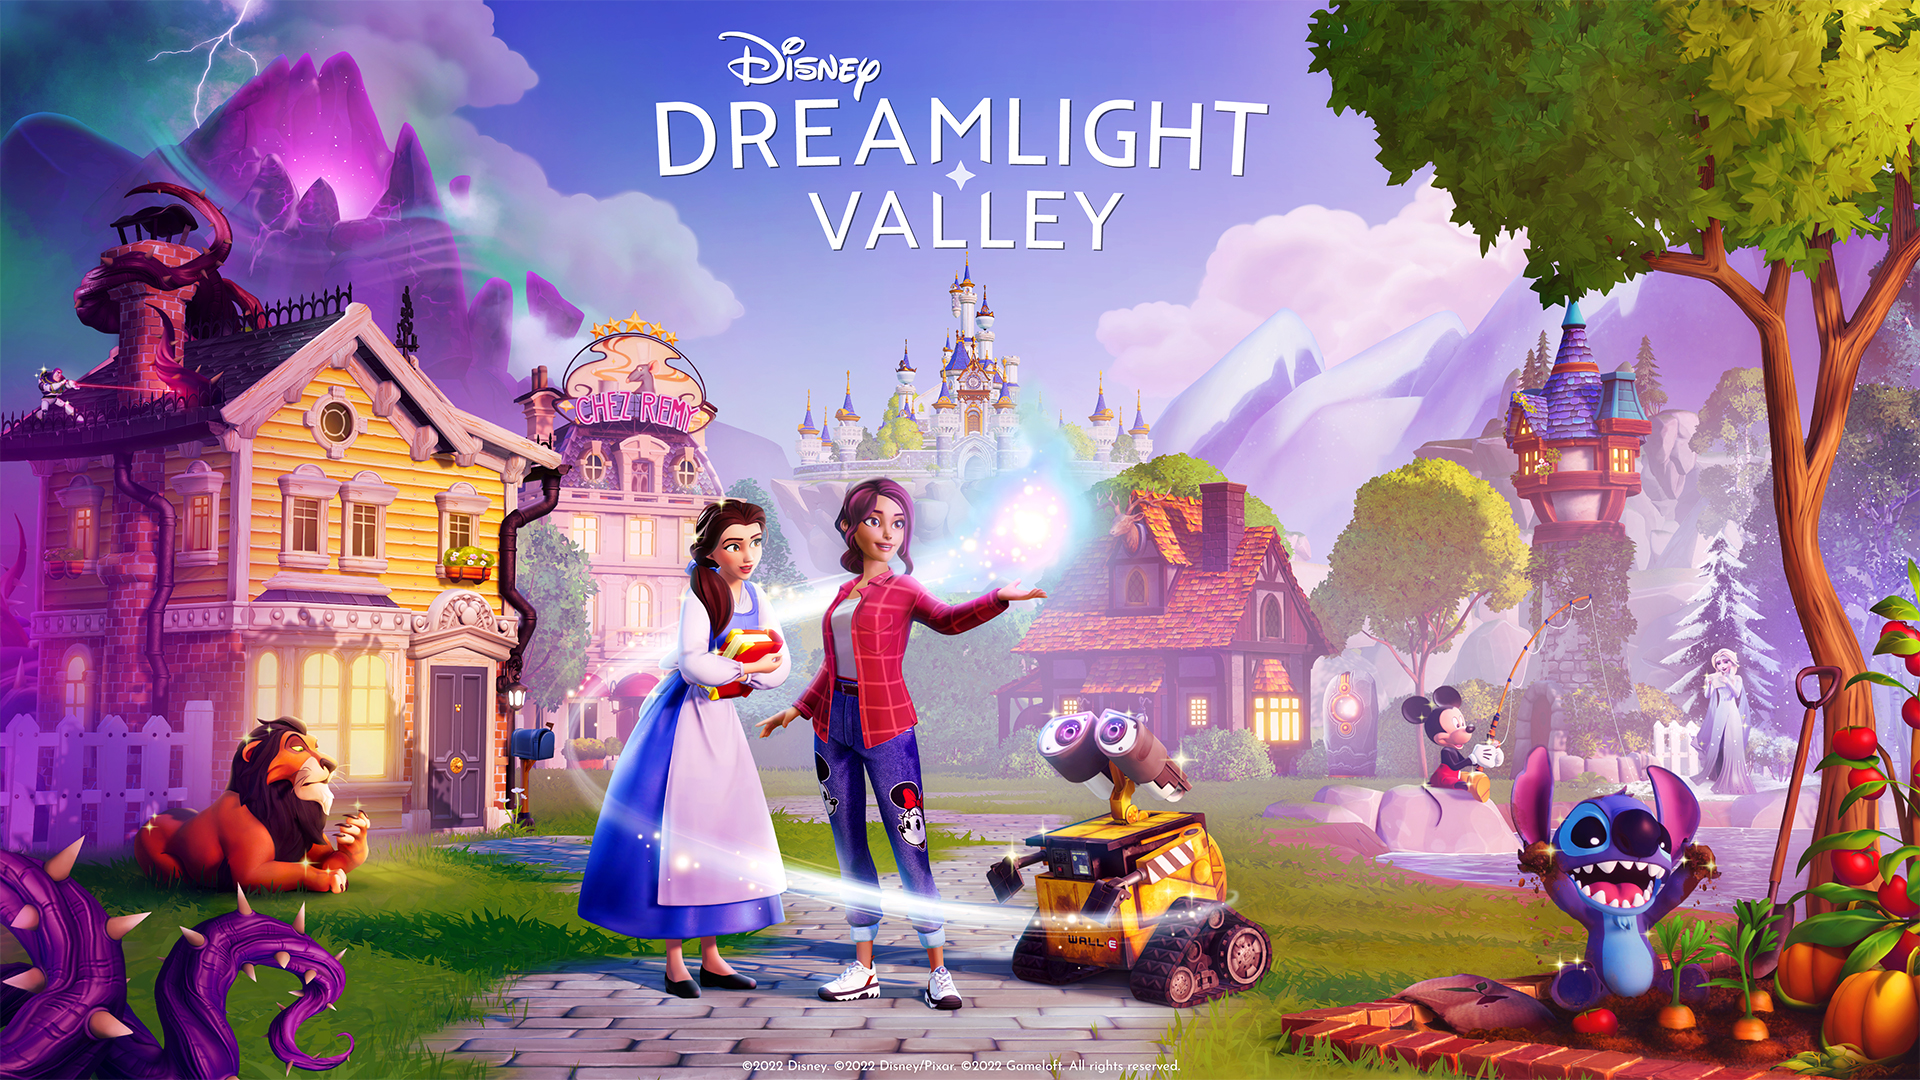 Disney Dreamlight Valley out now via paid Early Access